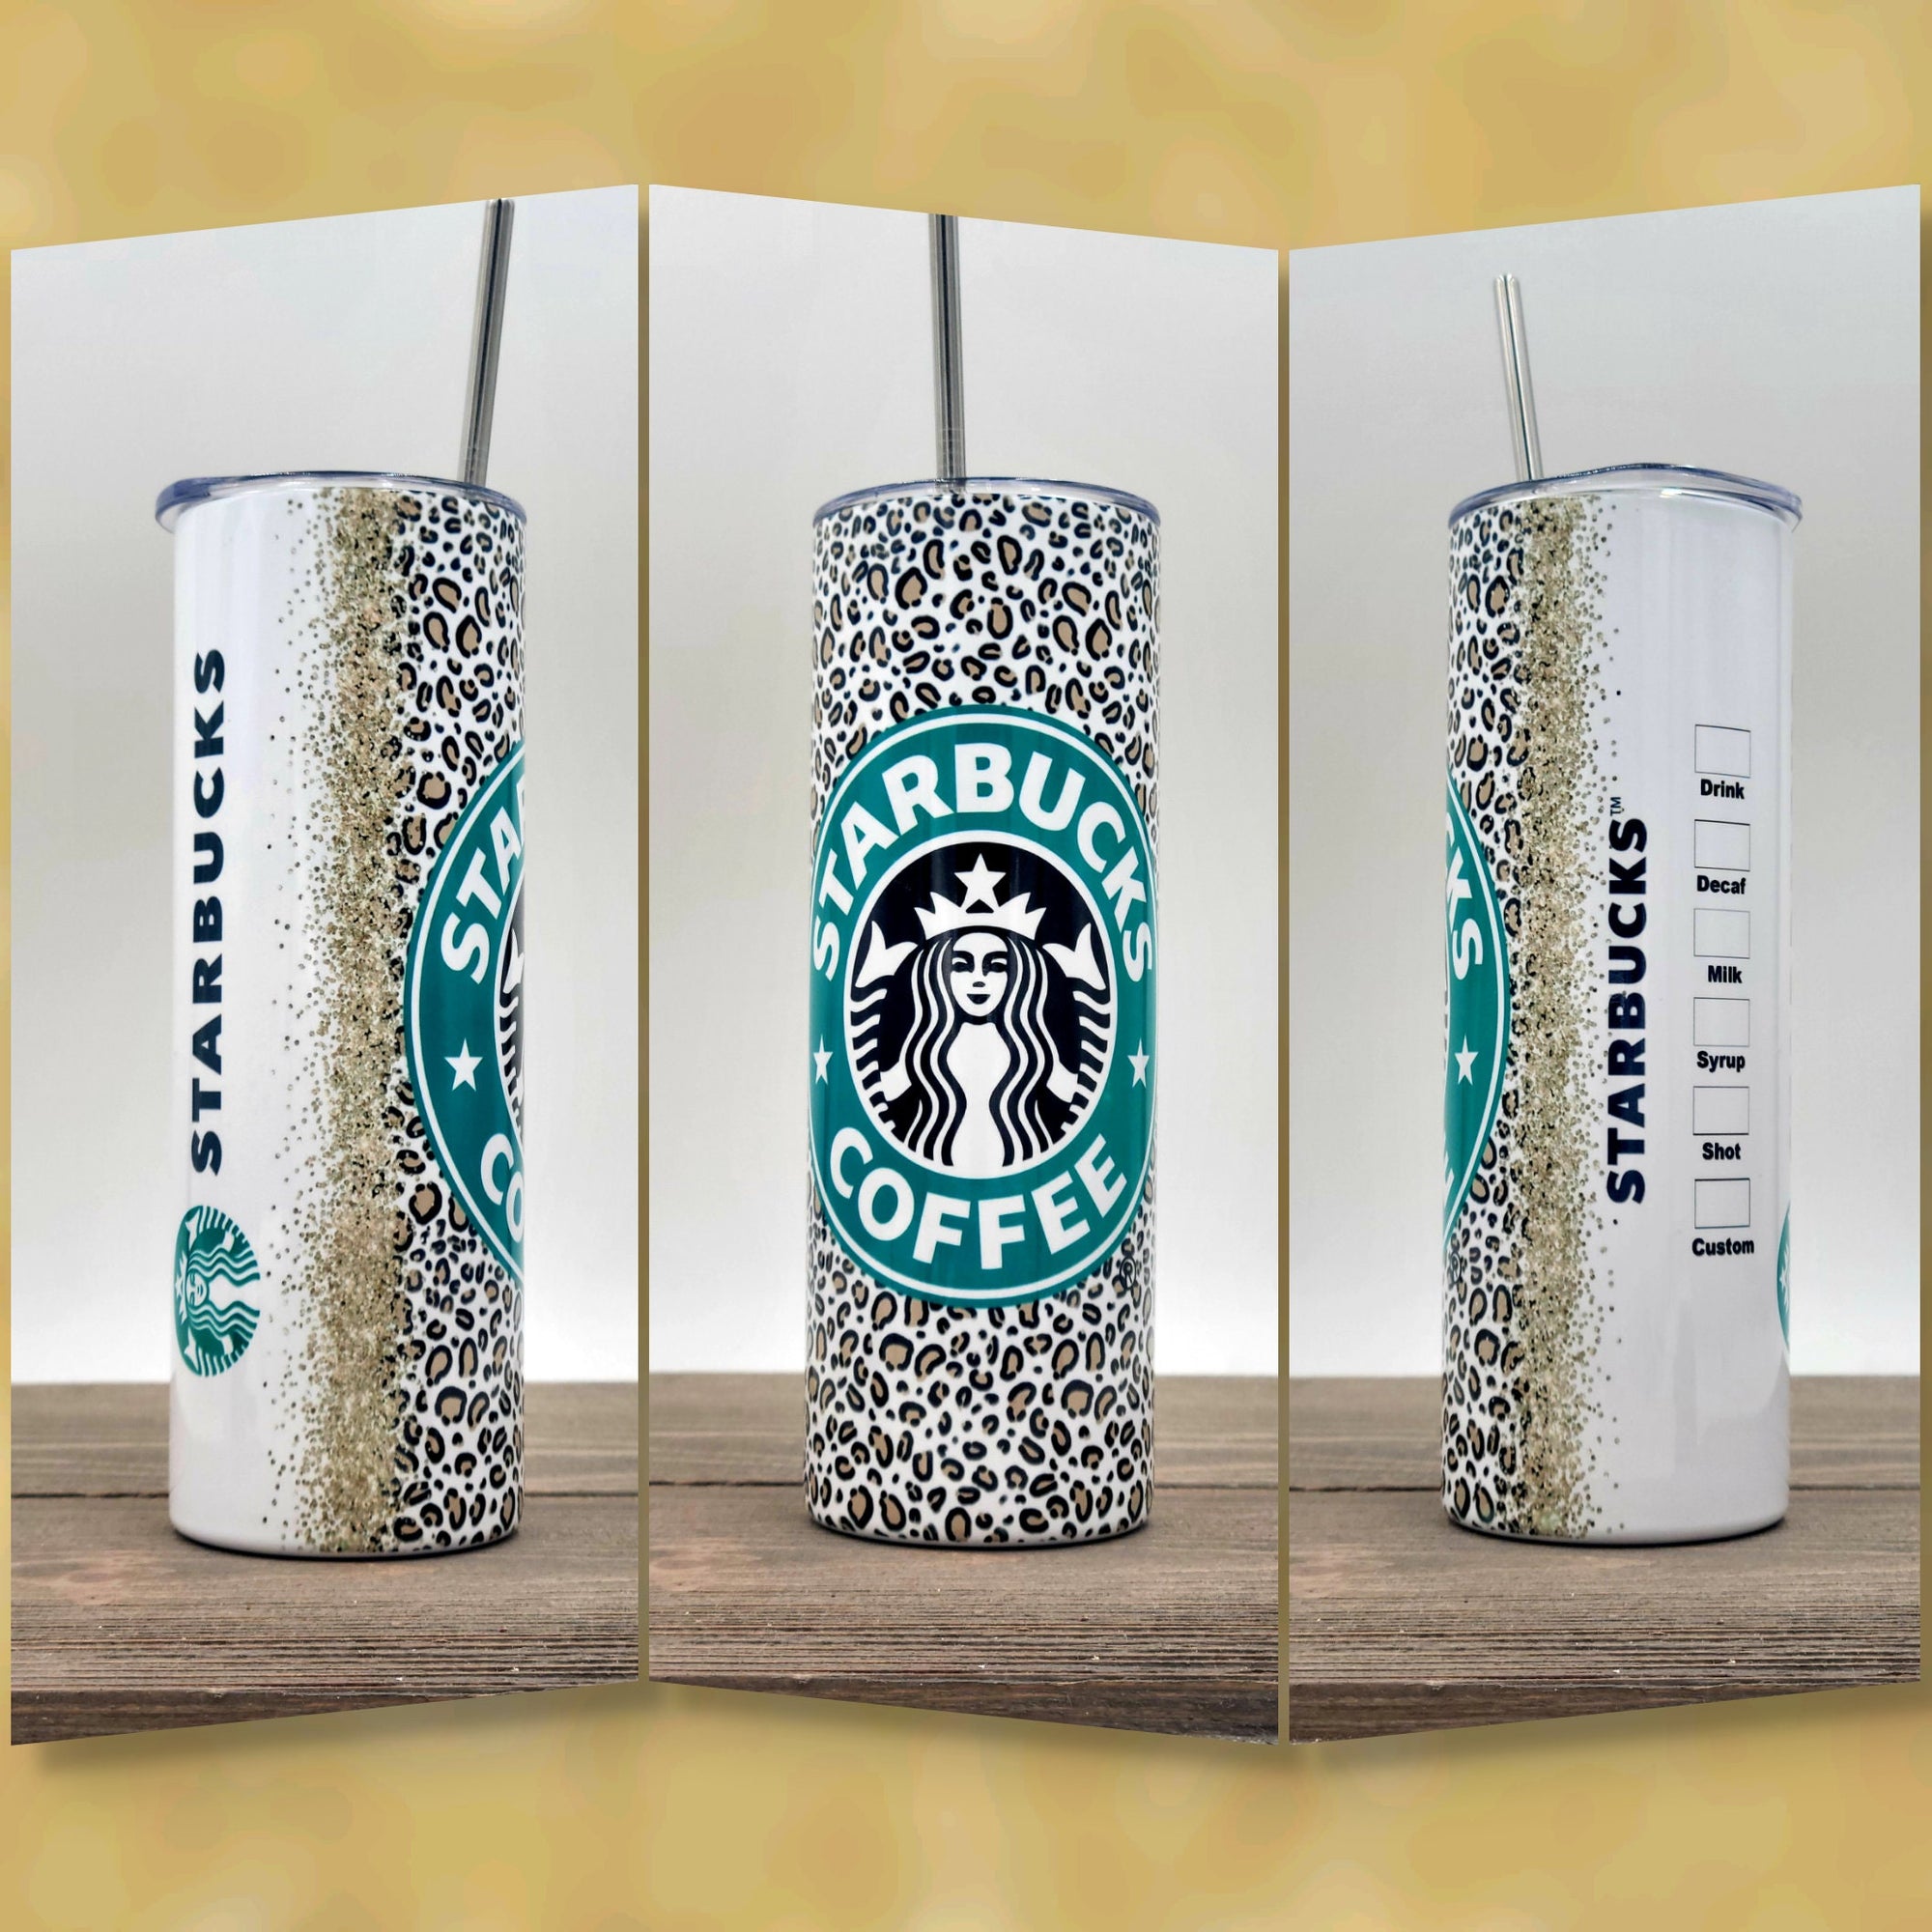 Starbucks Cheetah Print Tumbler, Stainless Steel Tumbler, Gifts for Her, Coffee Shop, Gifts for Her, Girly Tumbler, Lepoard Print, Coffee